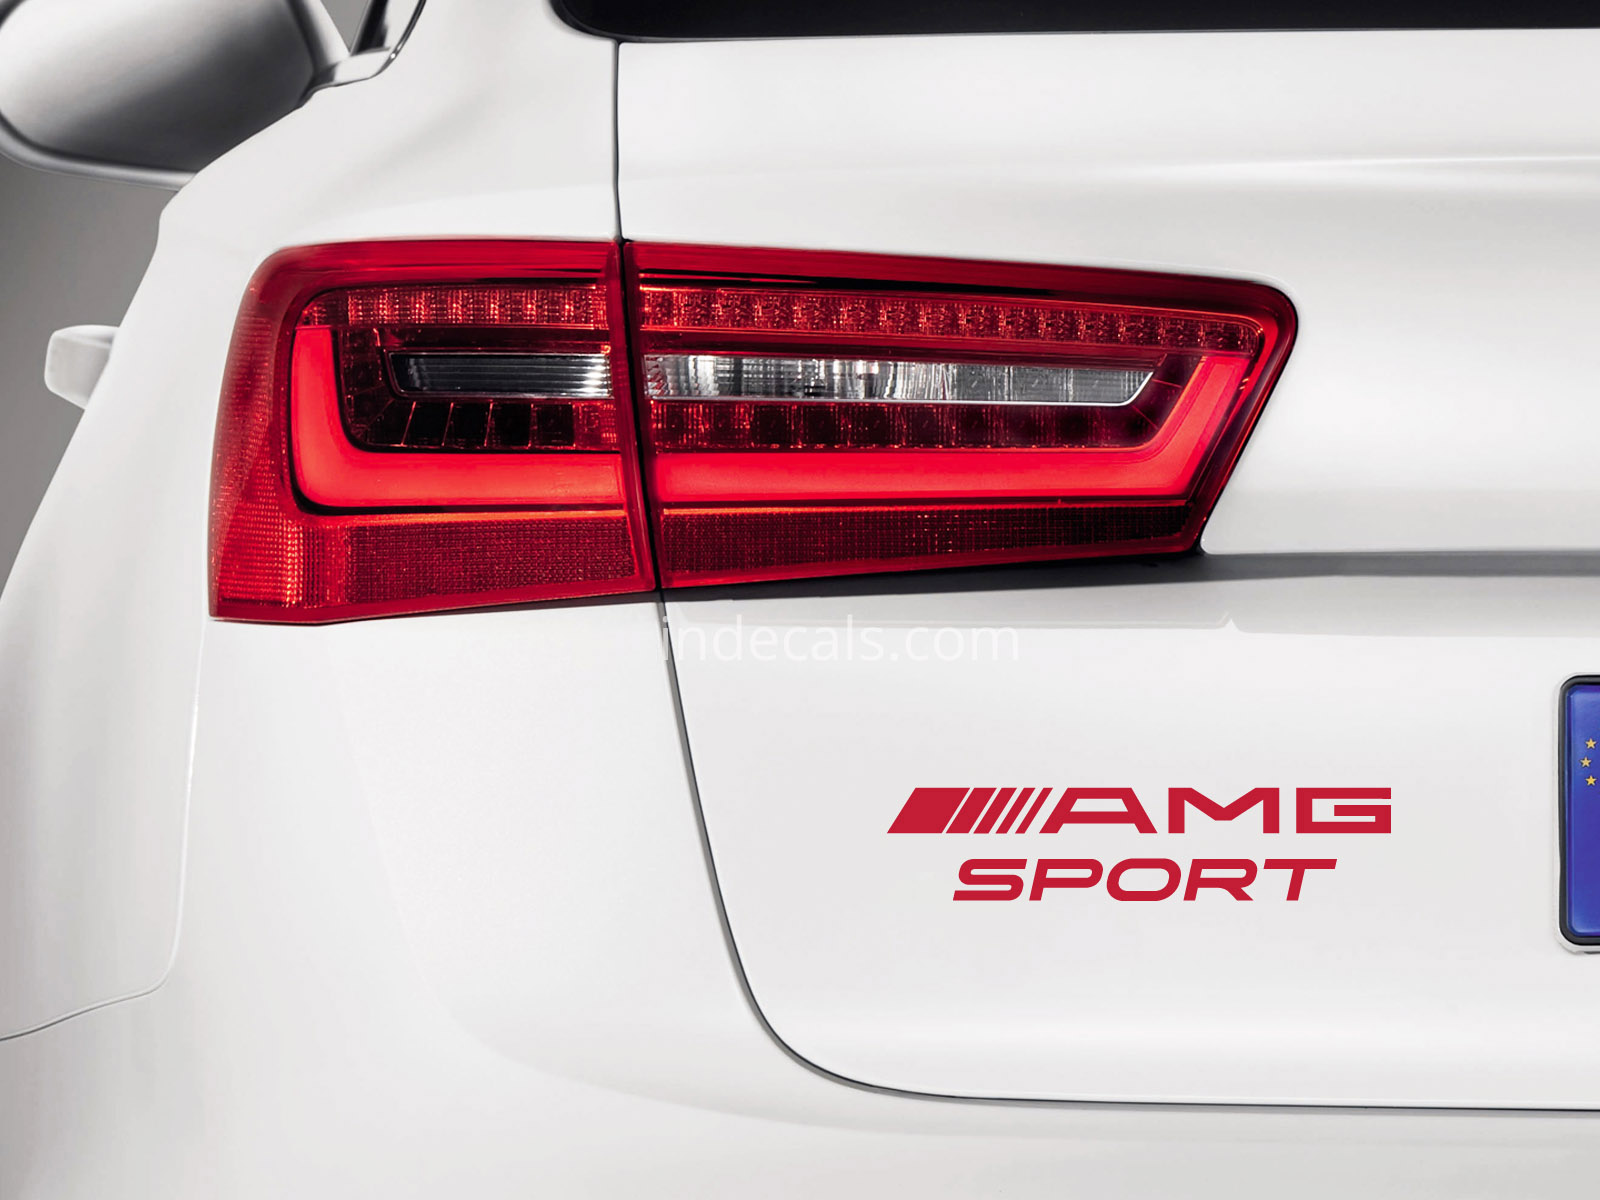 1 x AMG Sports Sticker for Trunk - Red